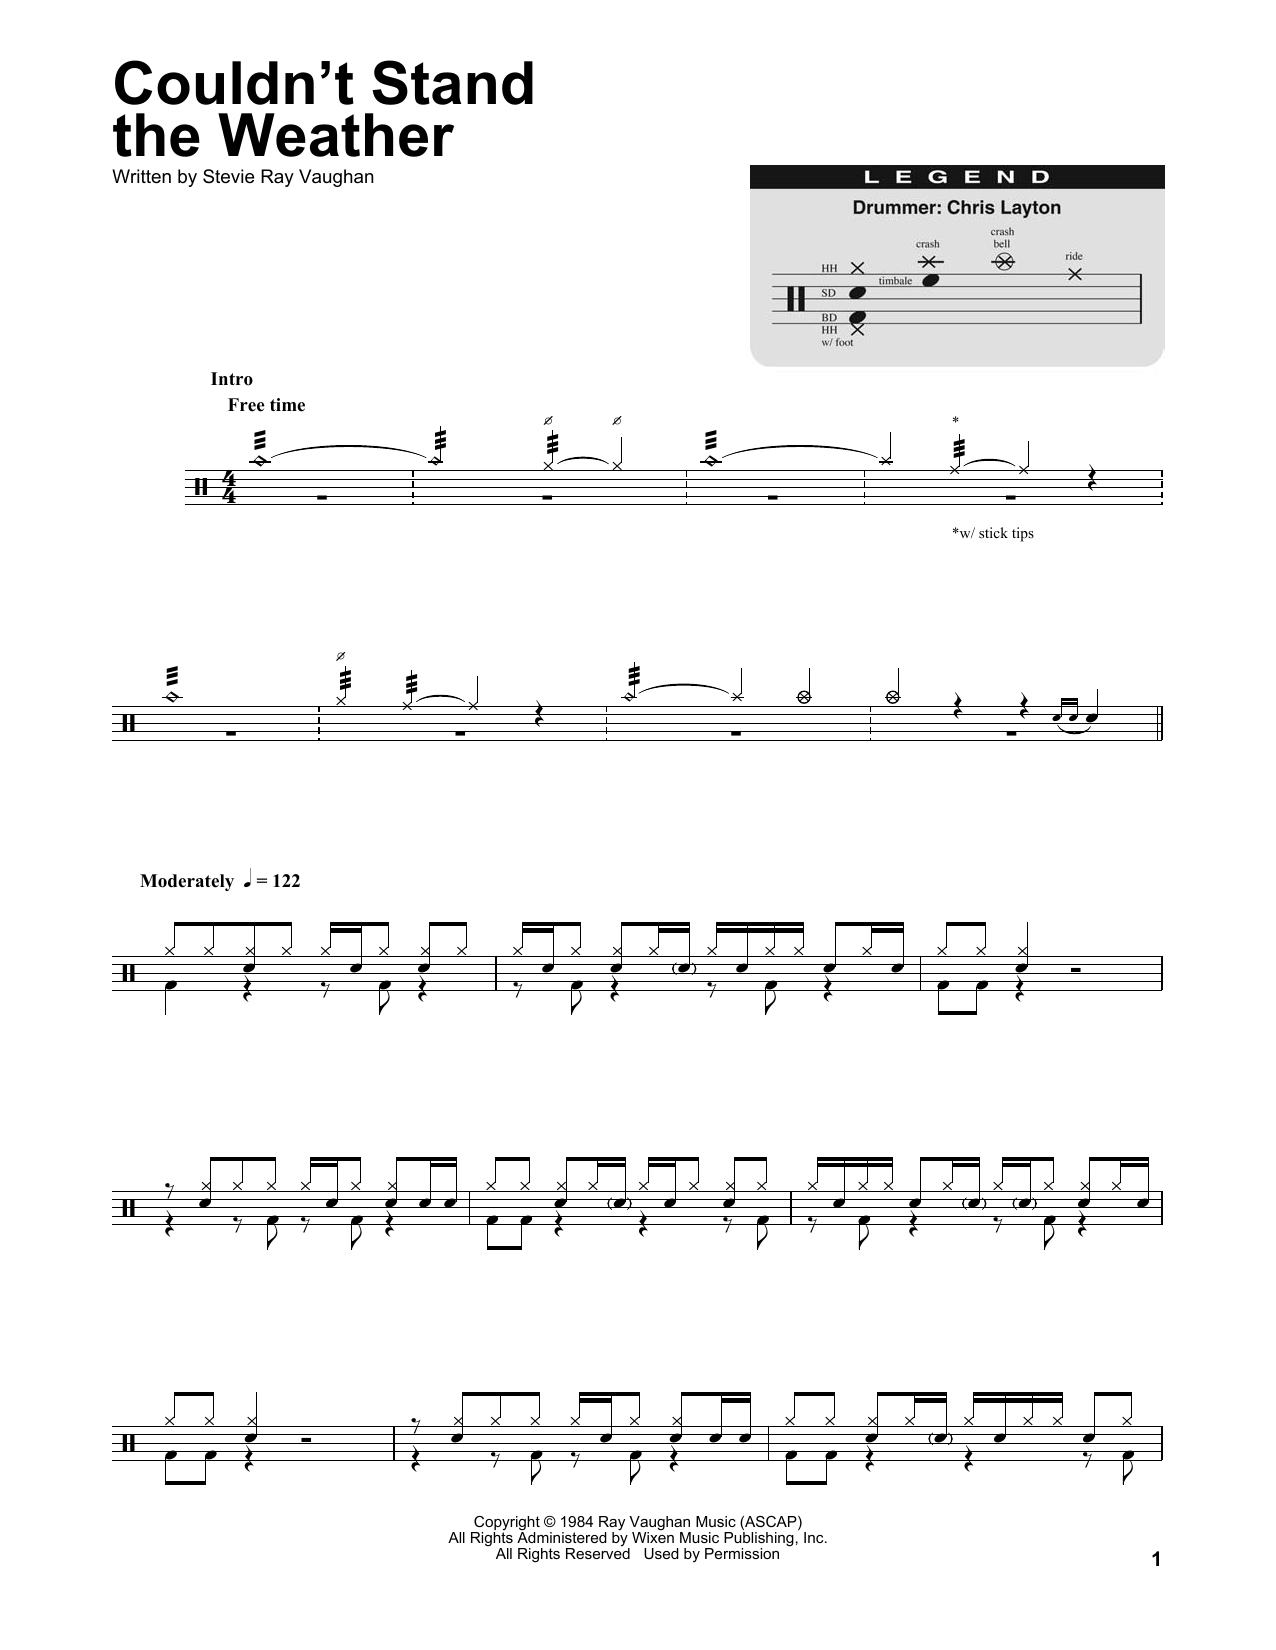 Download Stevie Ray Vaughan Couldn't Stand The Weather Sheet Music